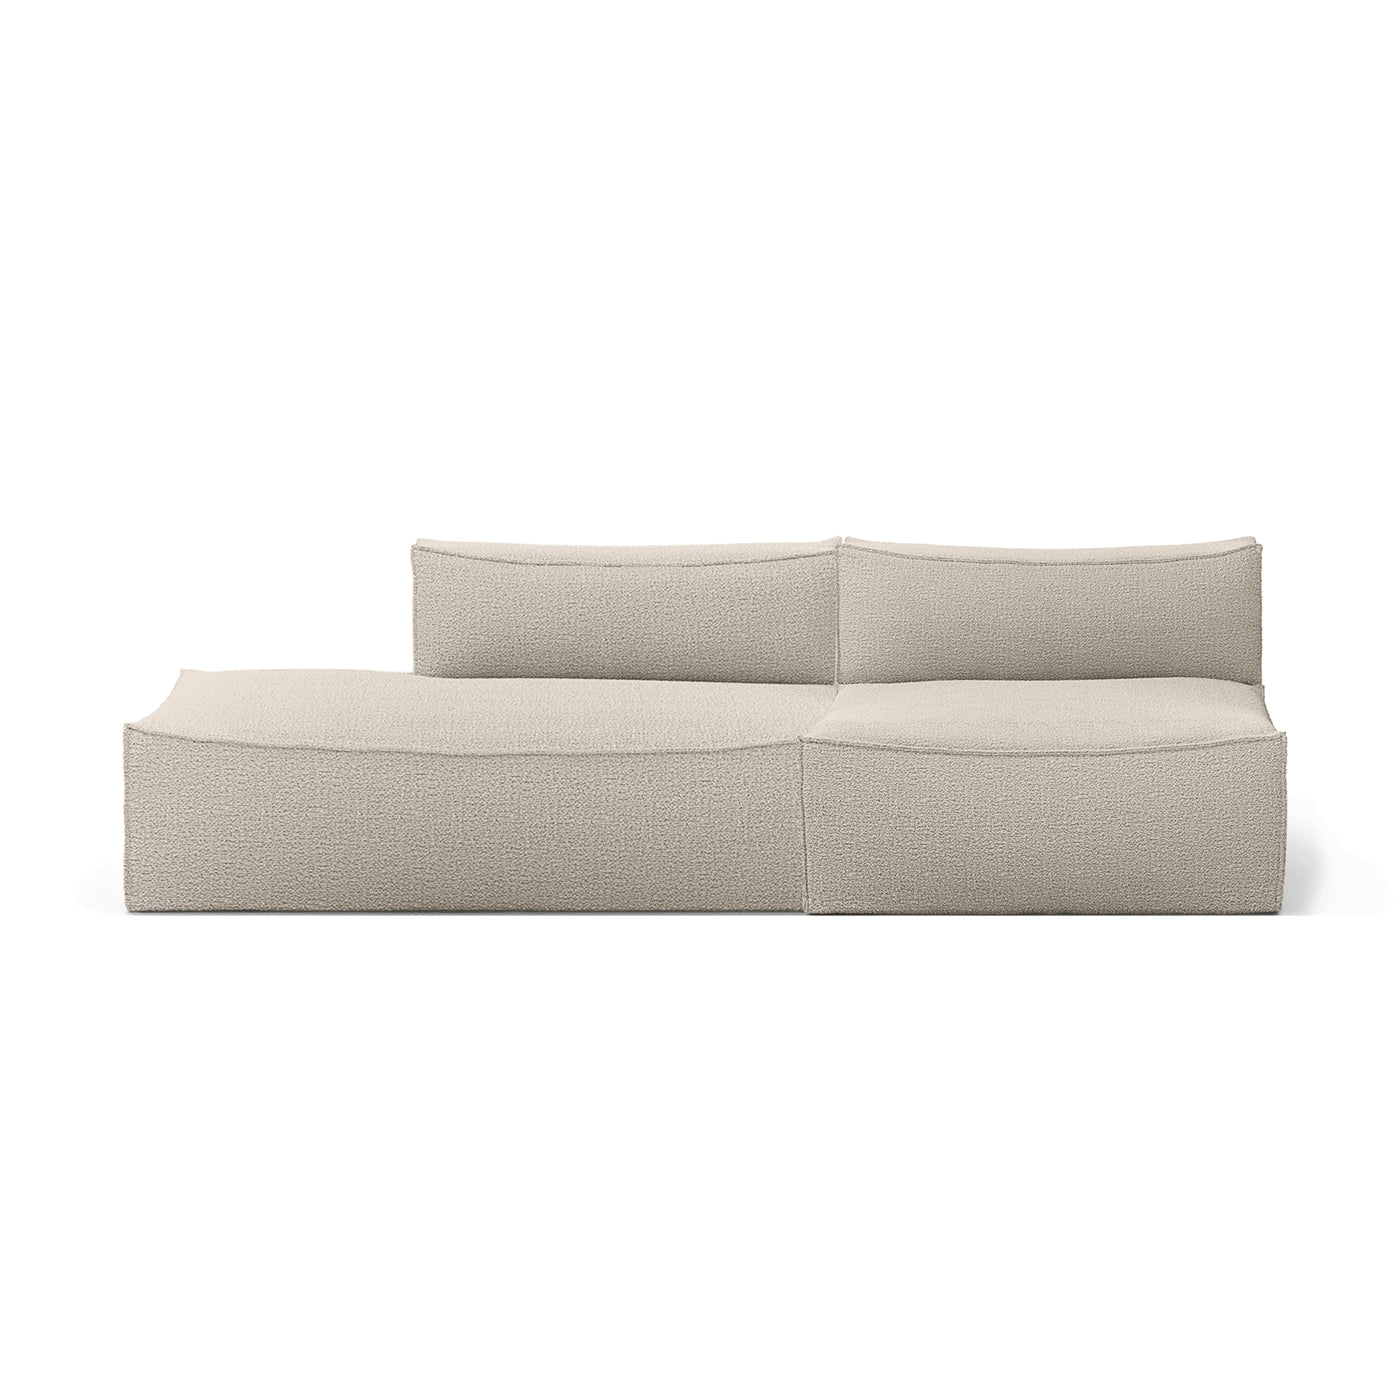 Ferm LIVING Catena Modular 2 Seater sofa. Made to order at someday designs #colour_natural-wool-boucle